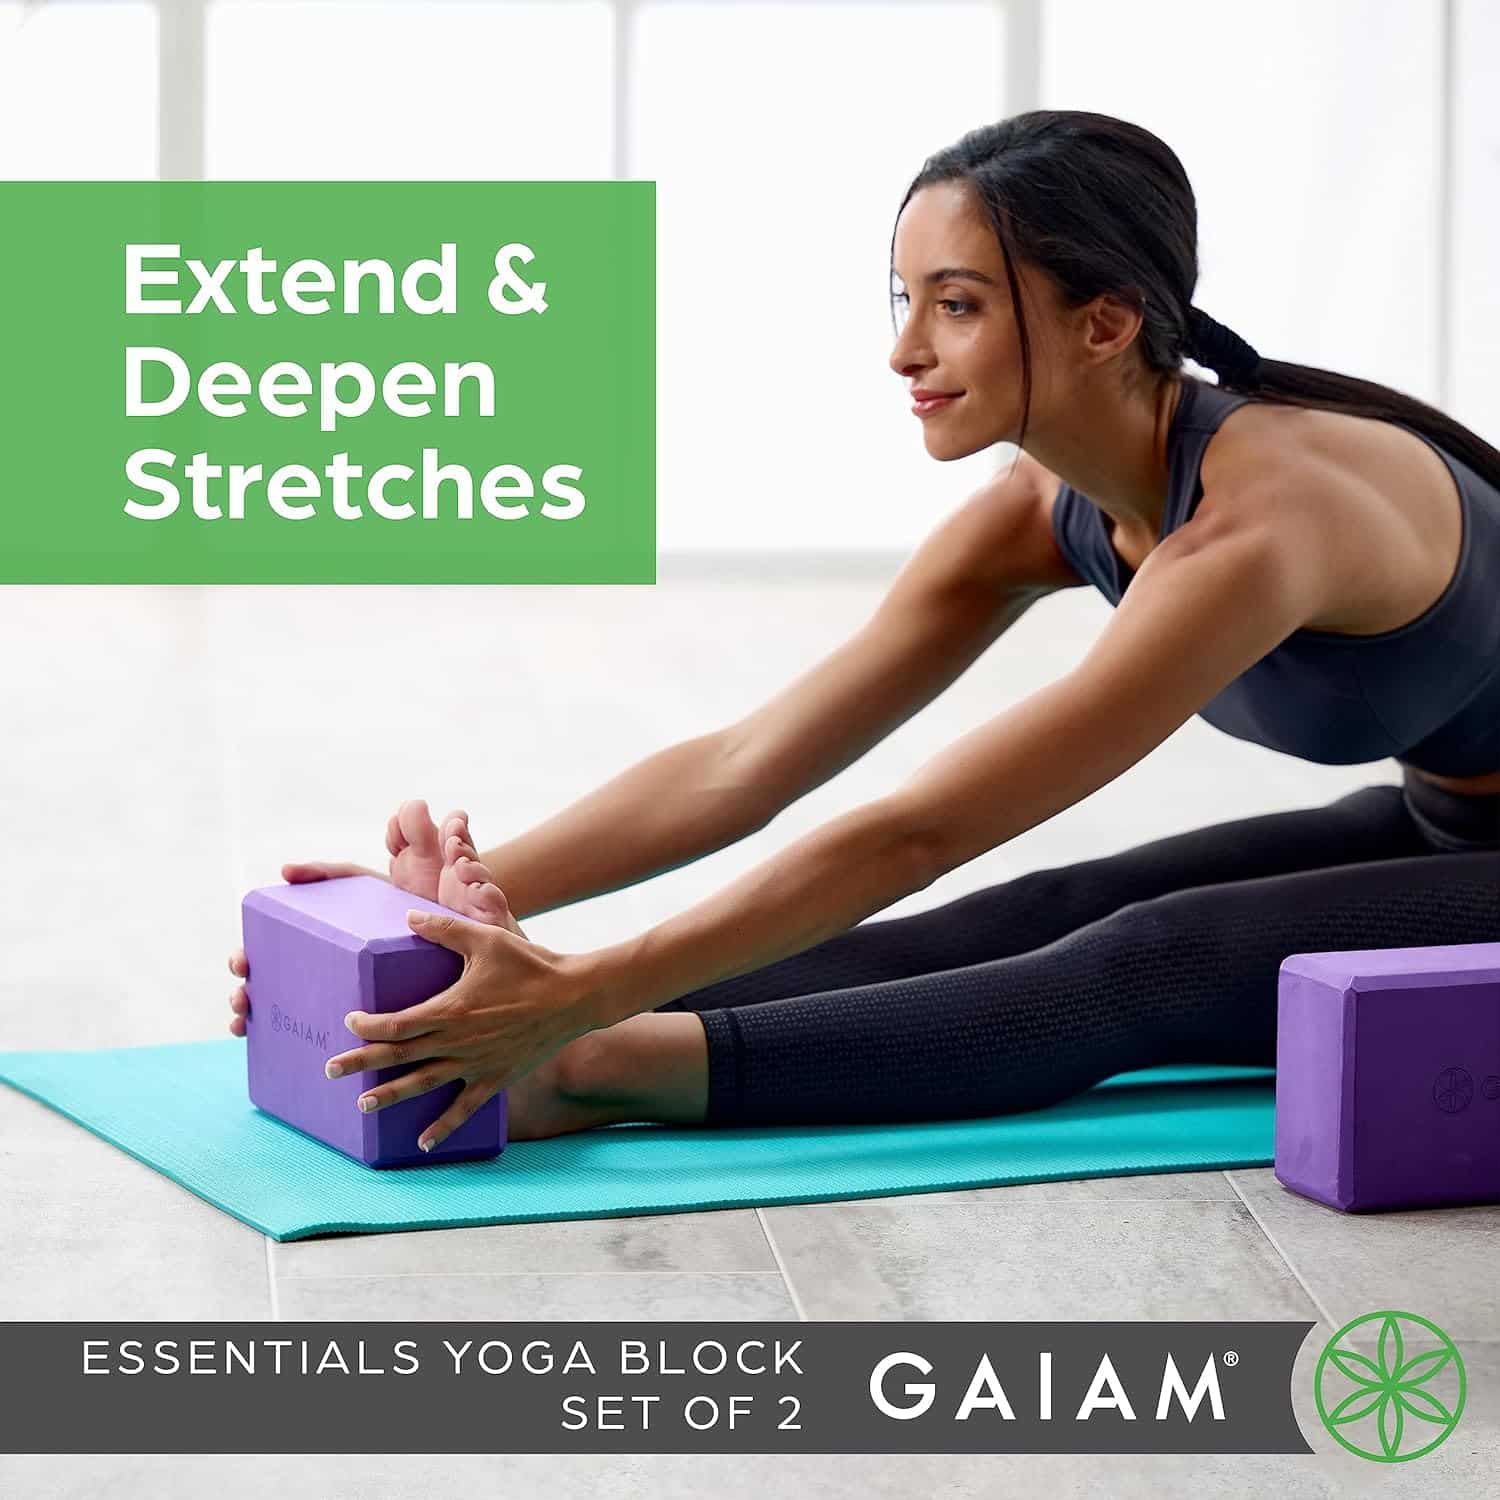 Gaiam Essentials Yoga Block (Set Of 2) - The Perfect Support for Your Yoga Practice